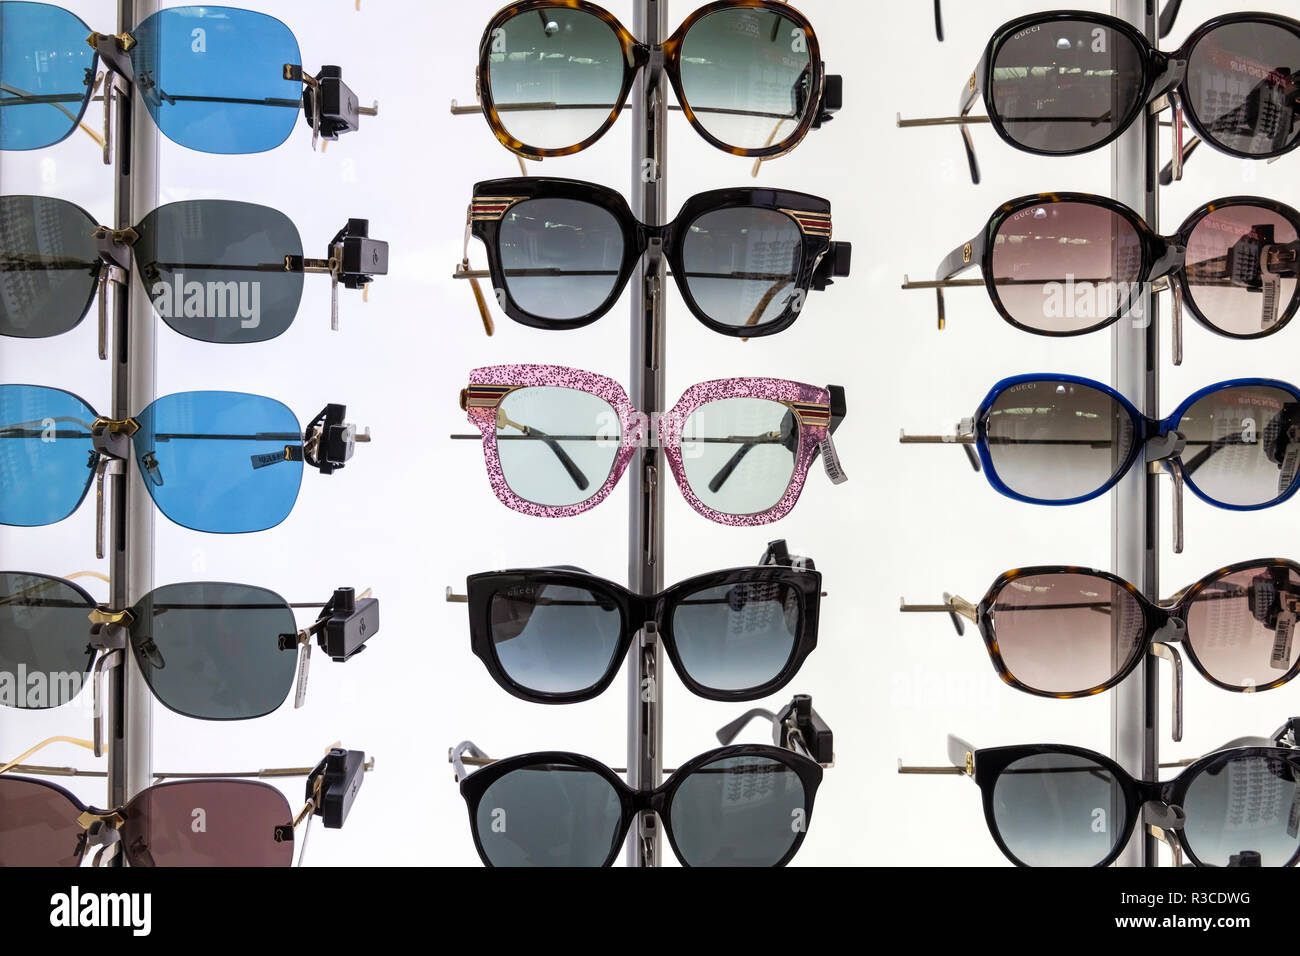 Larnaca, Cyprus - November 6. 2018. Sunglasses of famous brands in airport  duty free shop Stock Photo - Alamy